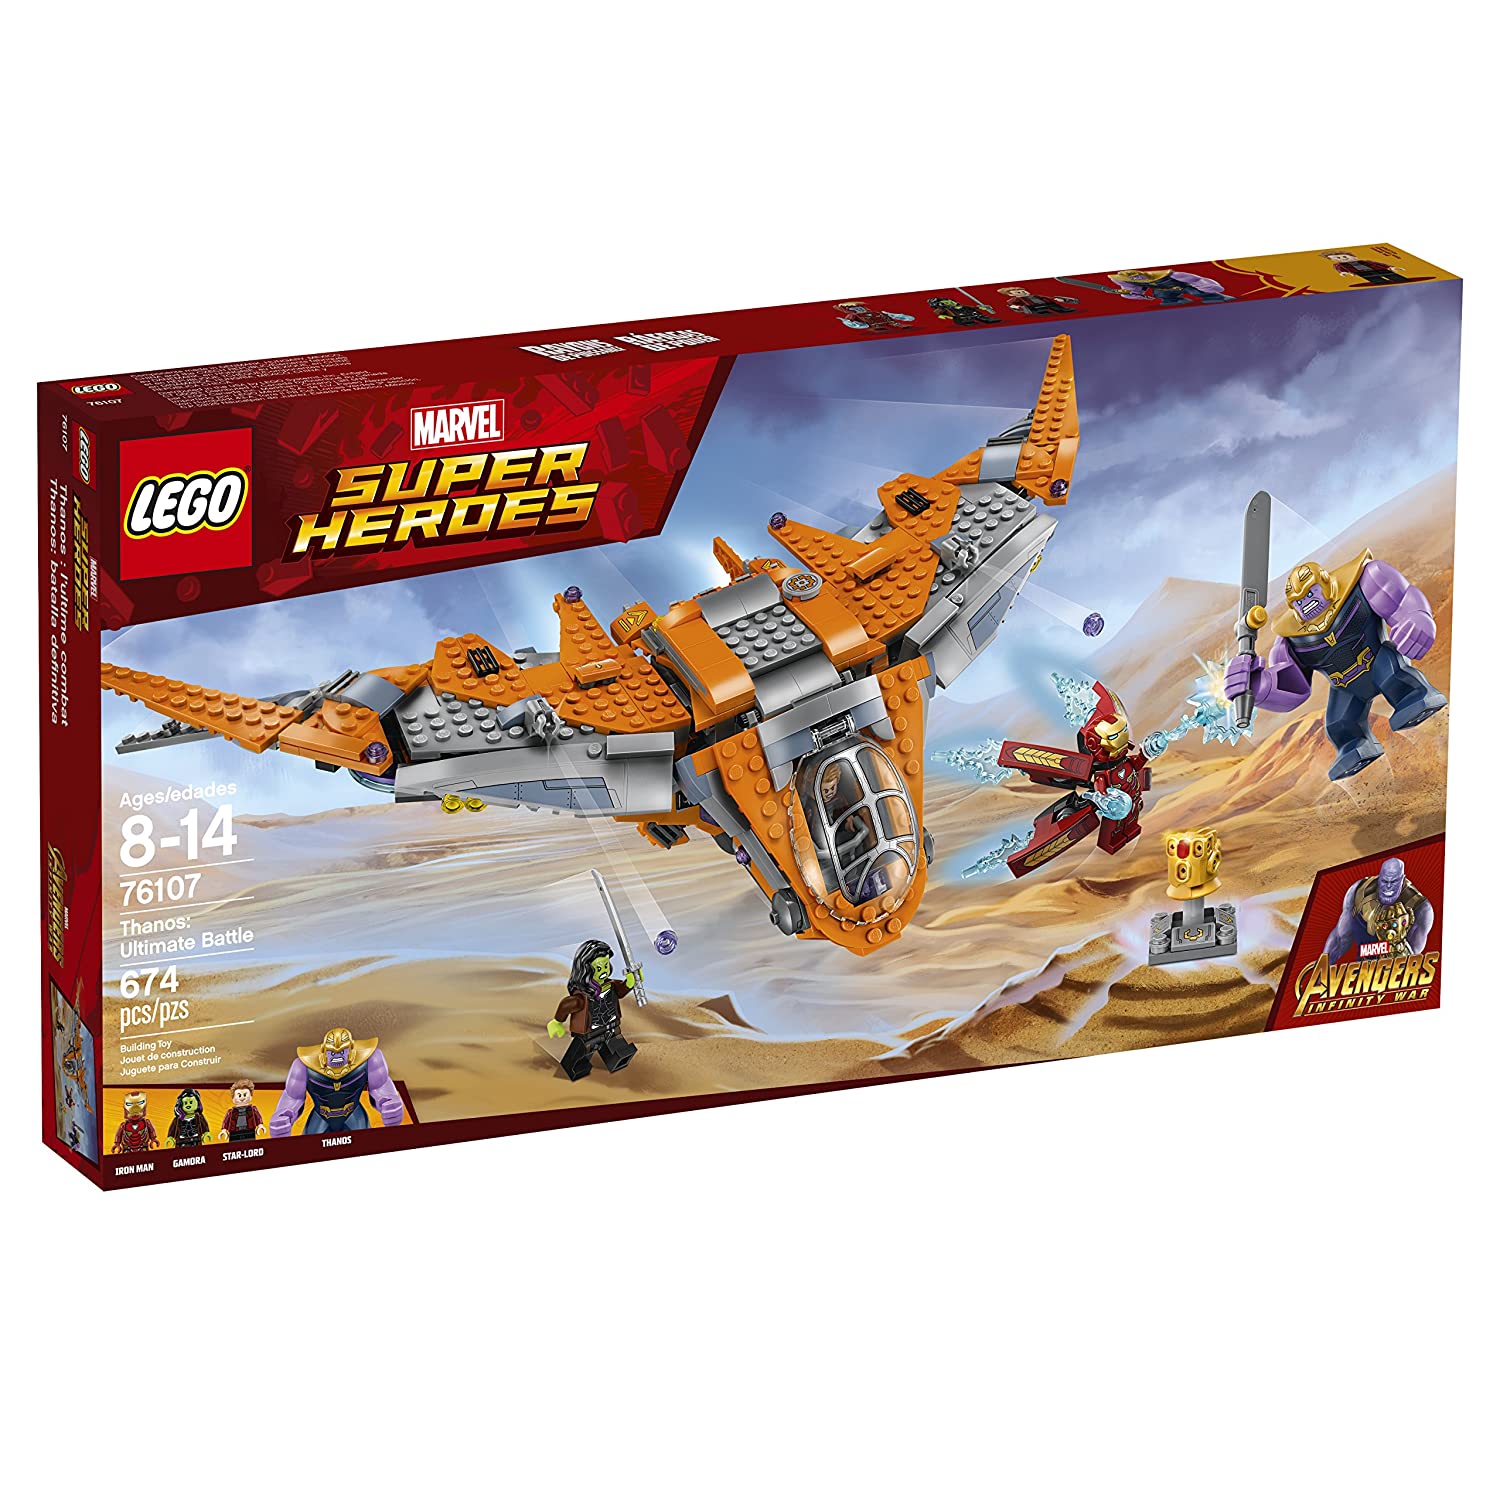 Top 9 Best LEGO Avengers Infinity War Sets Reviews in 2023 1